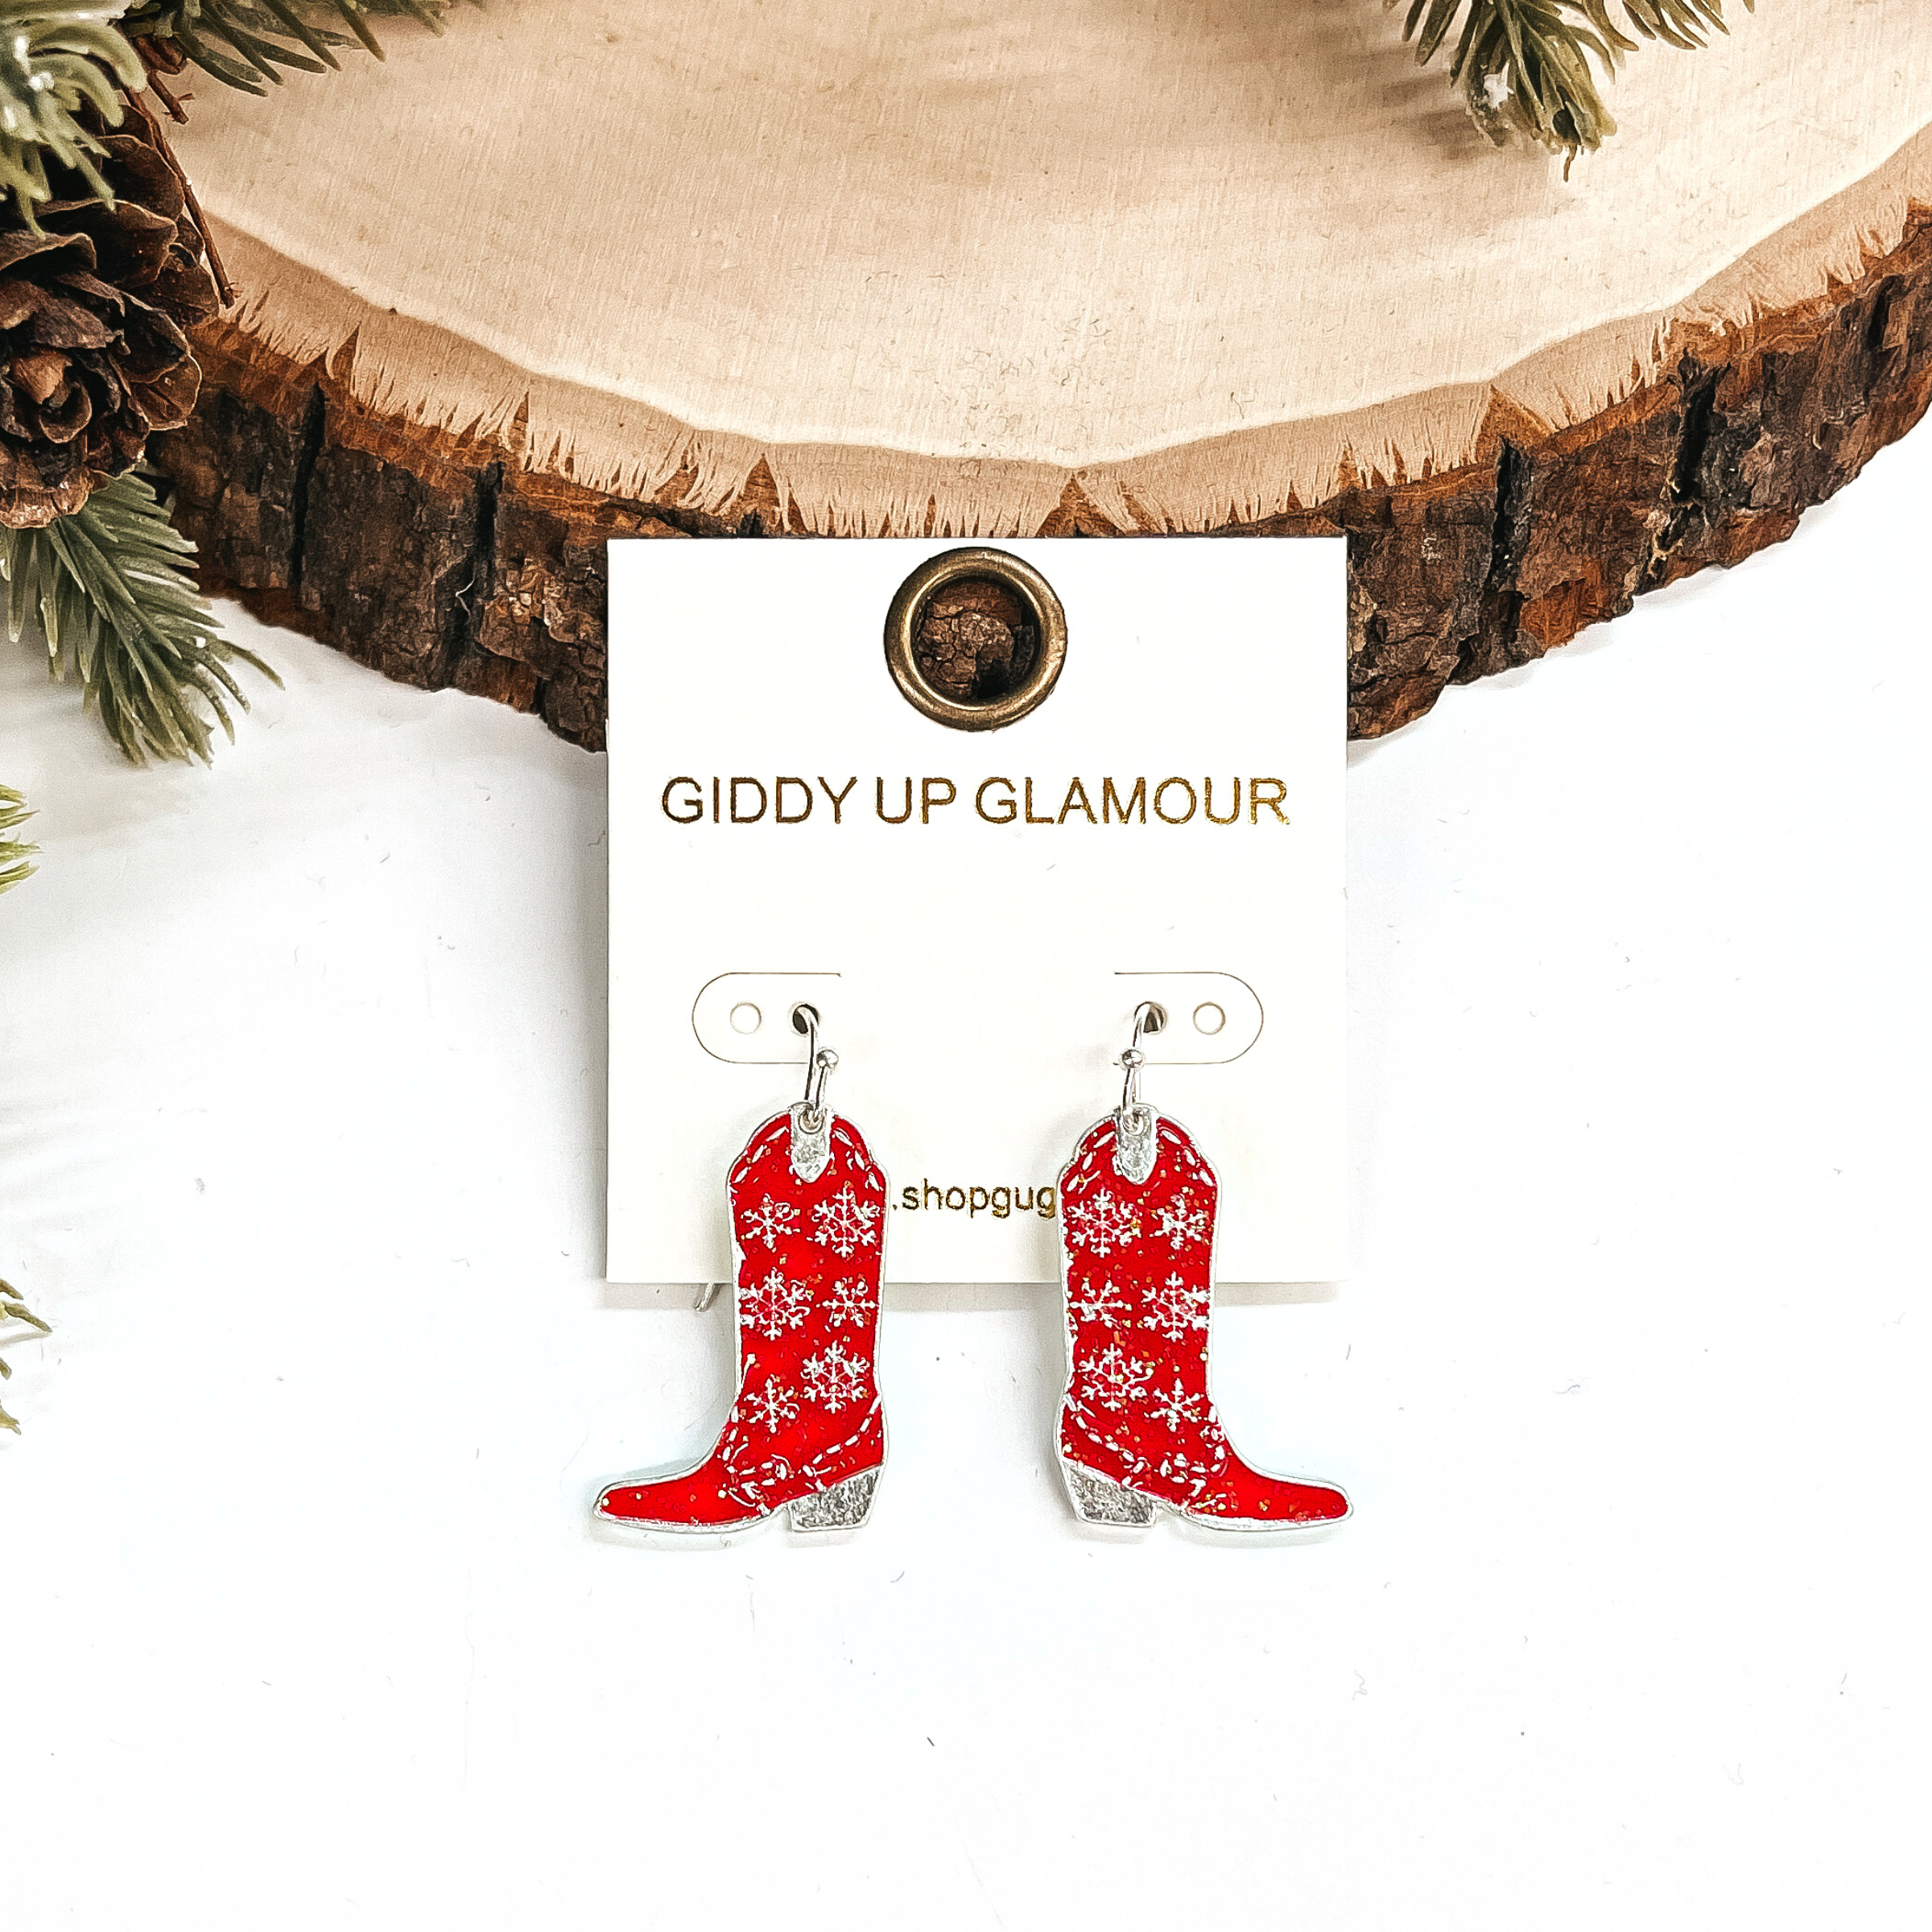 These are boot pendant drop earrings in red glitter and silver.  The earrings have a snowflake pattern in silver. These earrings are taken  leaning up against a slab of wood and on a white background with a pine cone  tree in the back as decor.